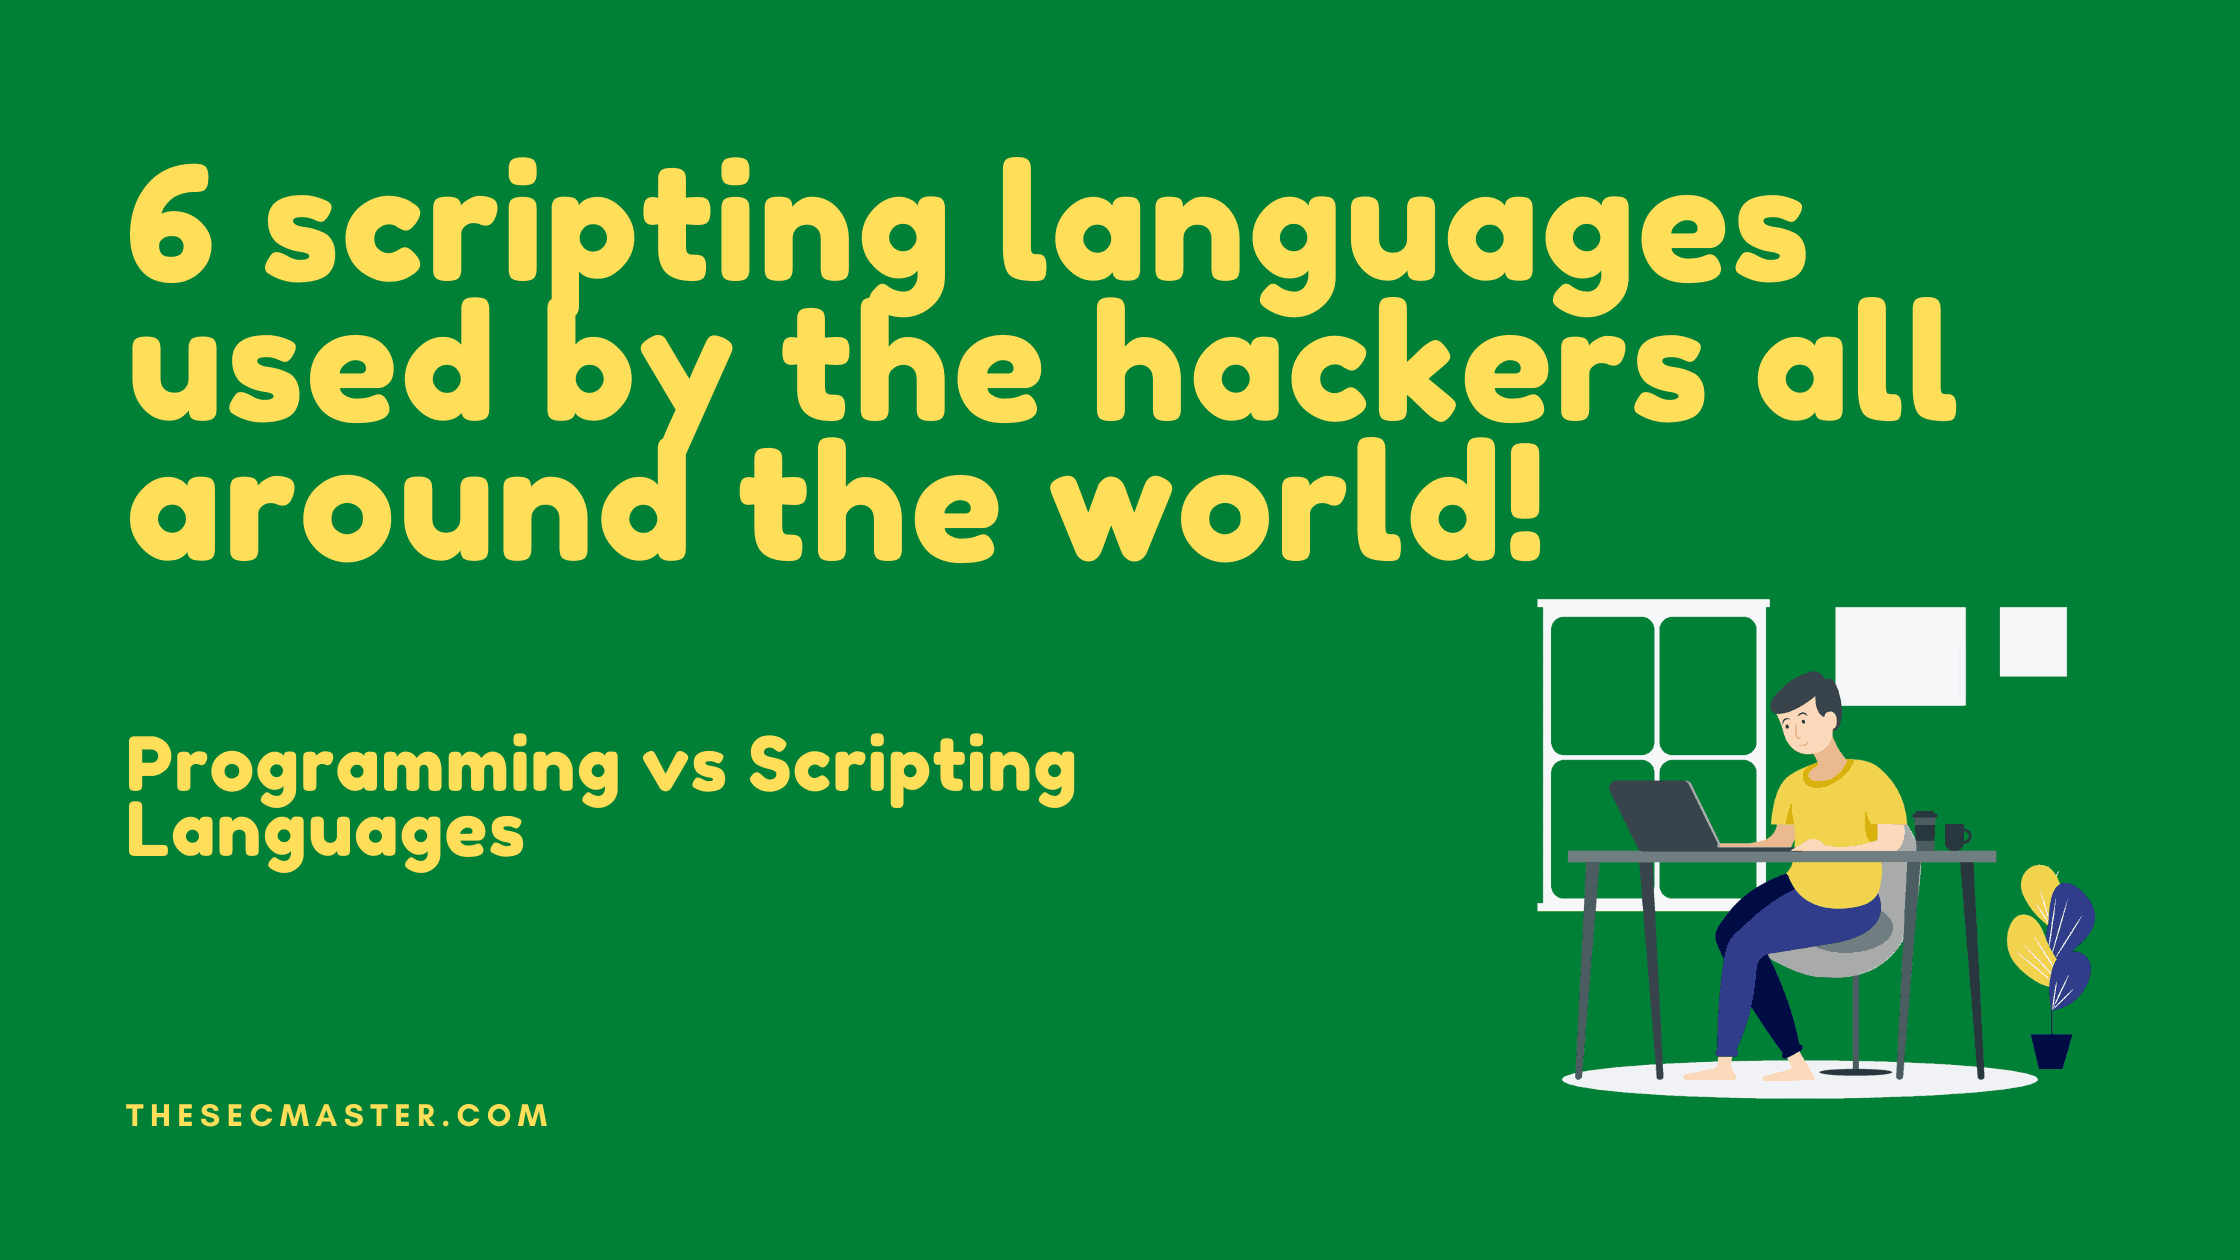 6 Scripting Languages Used By The Hackers All Around The World